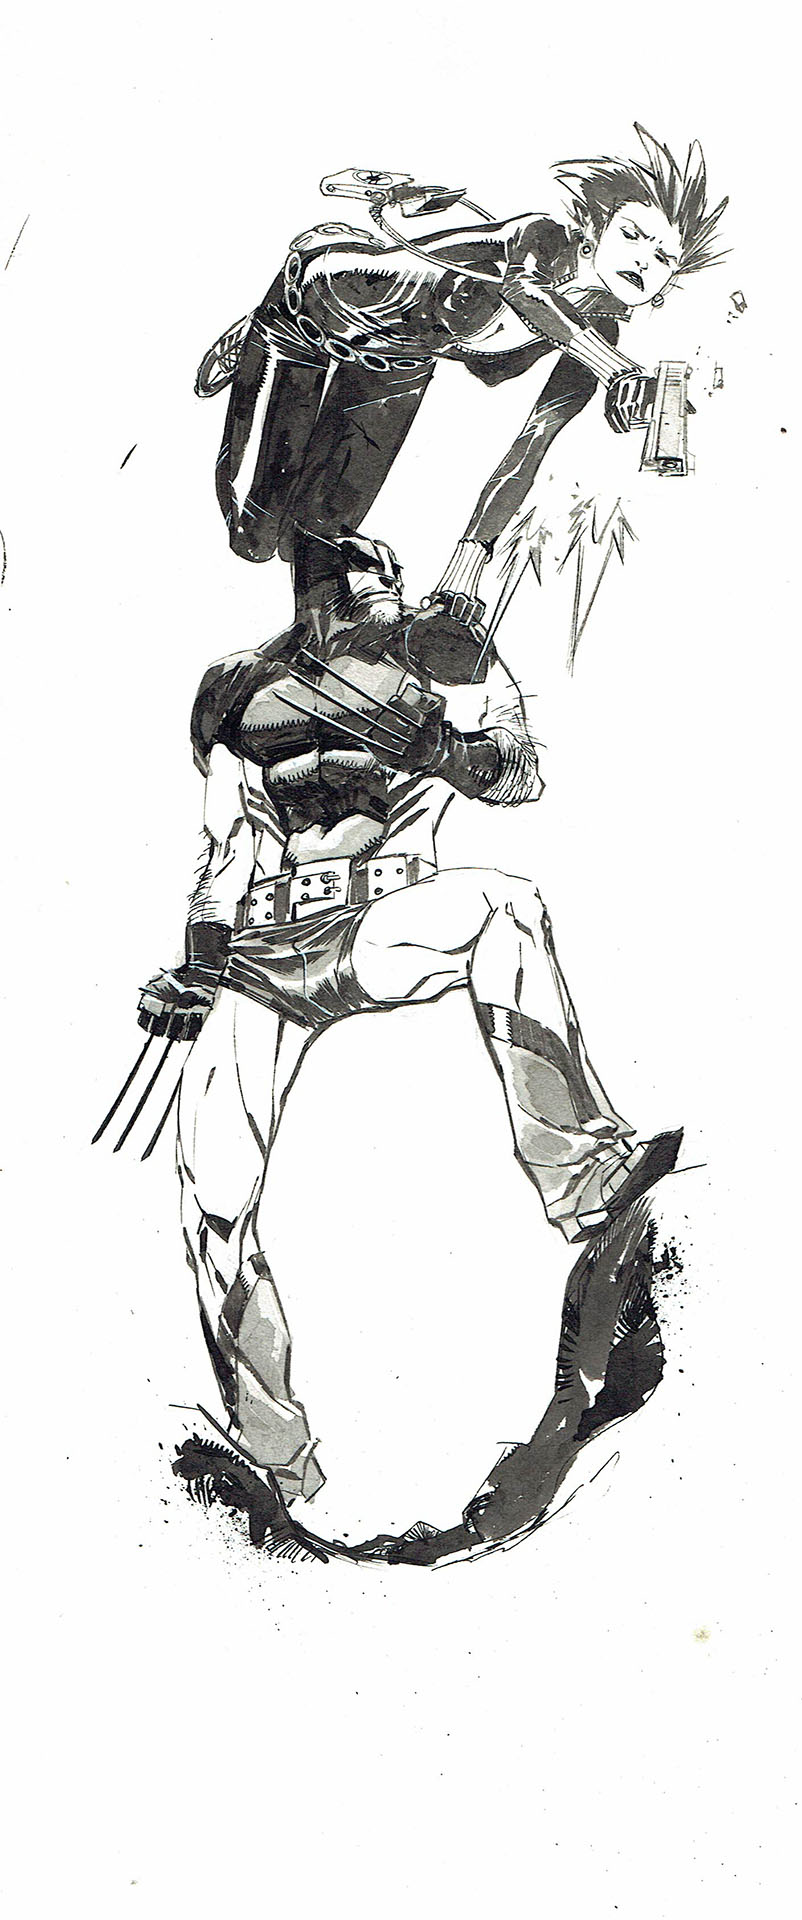 Sean MURPHY - The Wolverine - ABC's - Letter 'B : Wolverine and